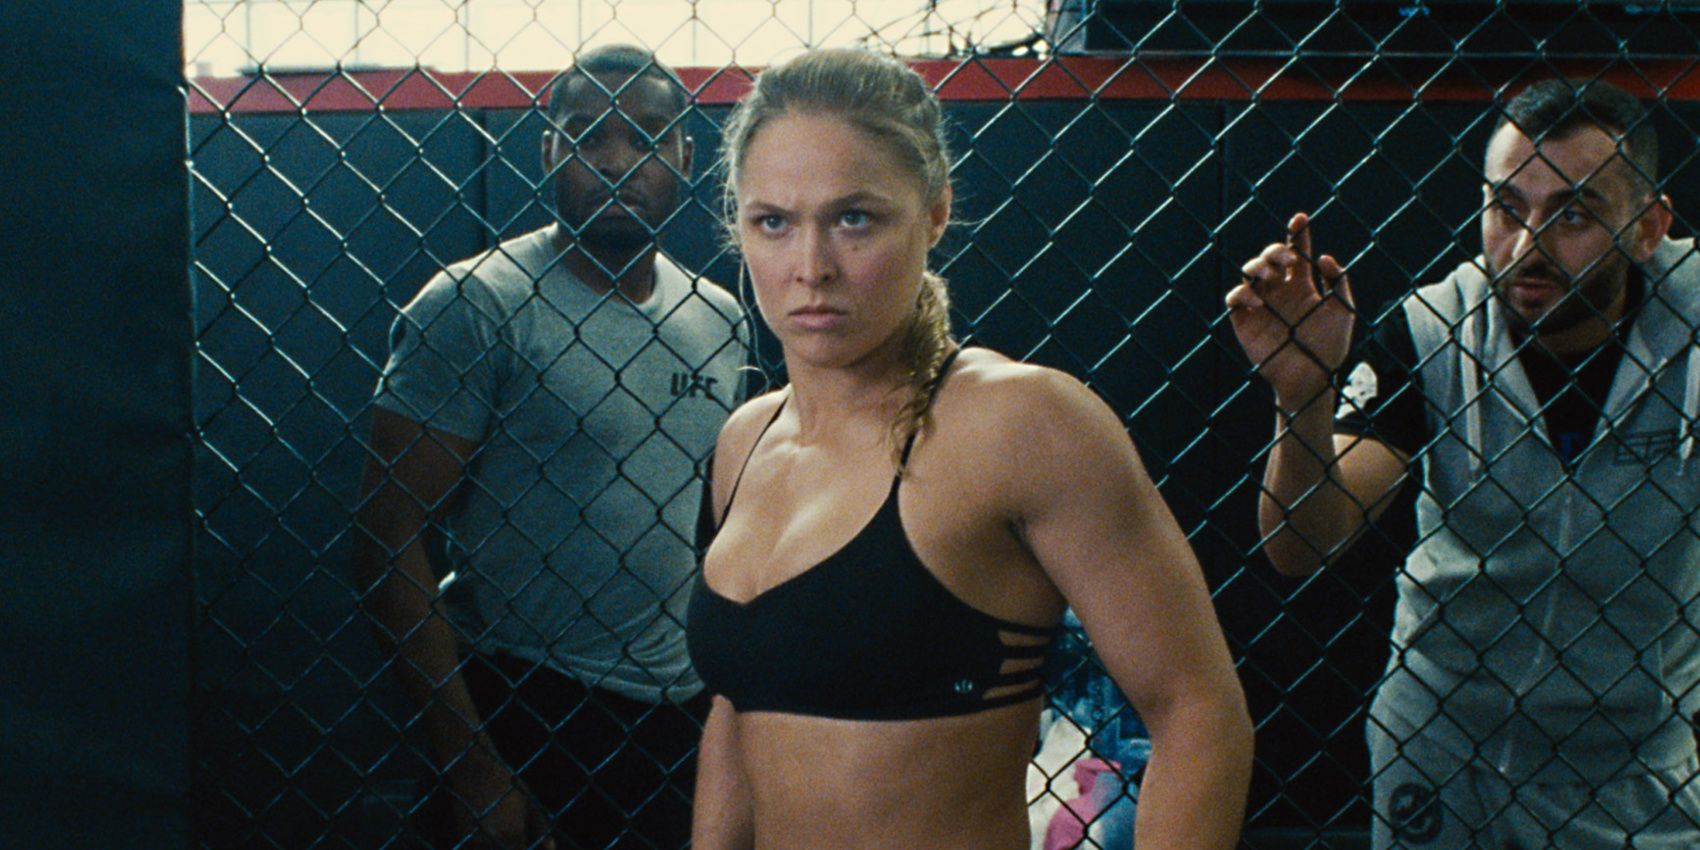 An image of Ronda Rousey in a cage match